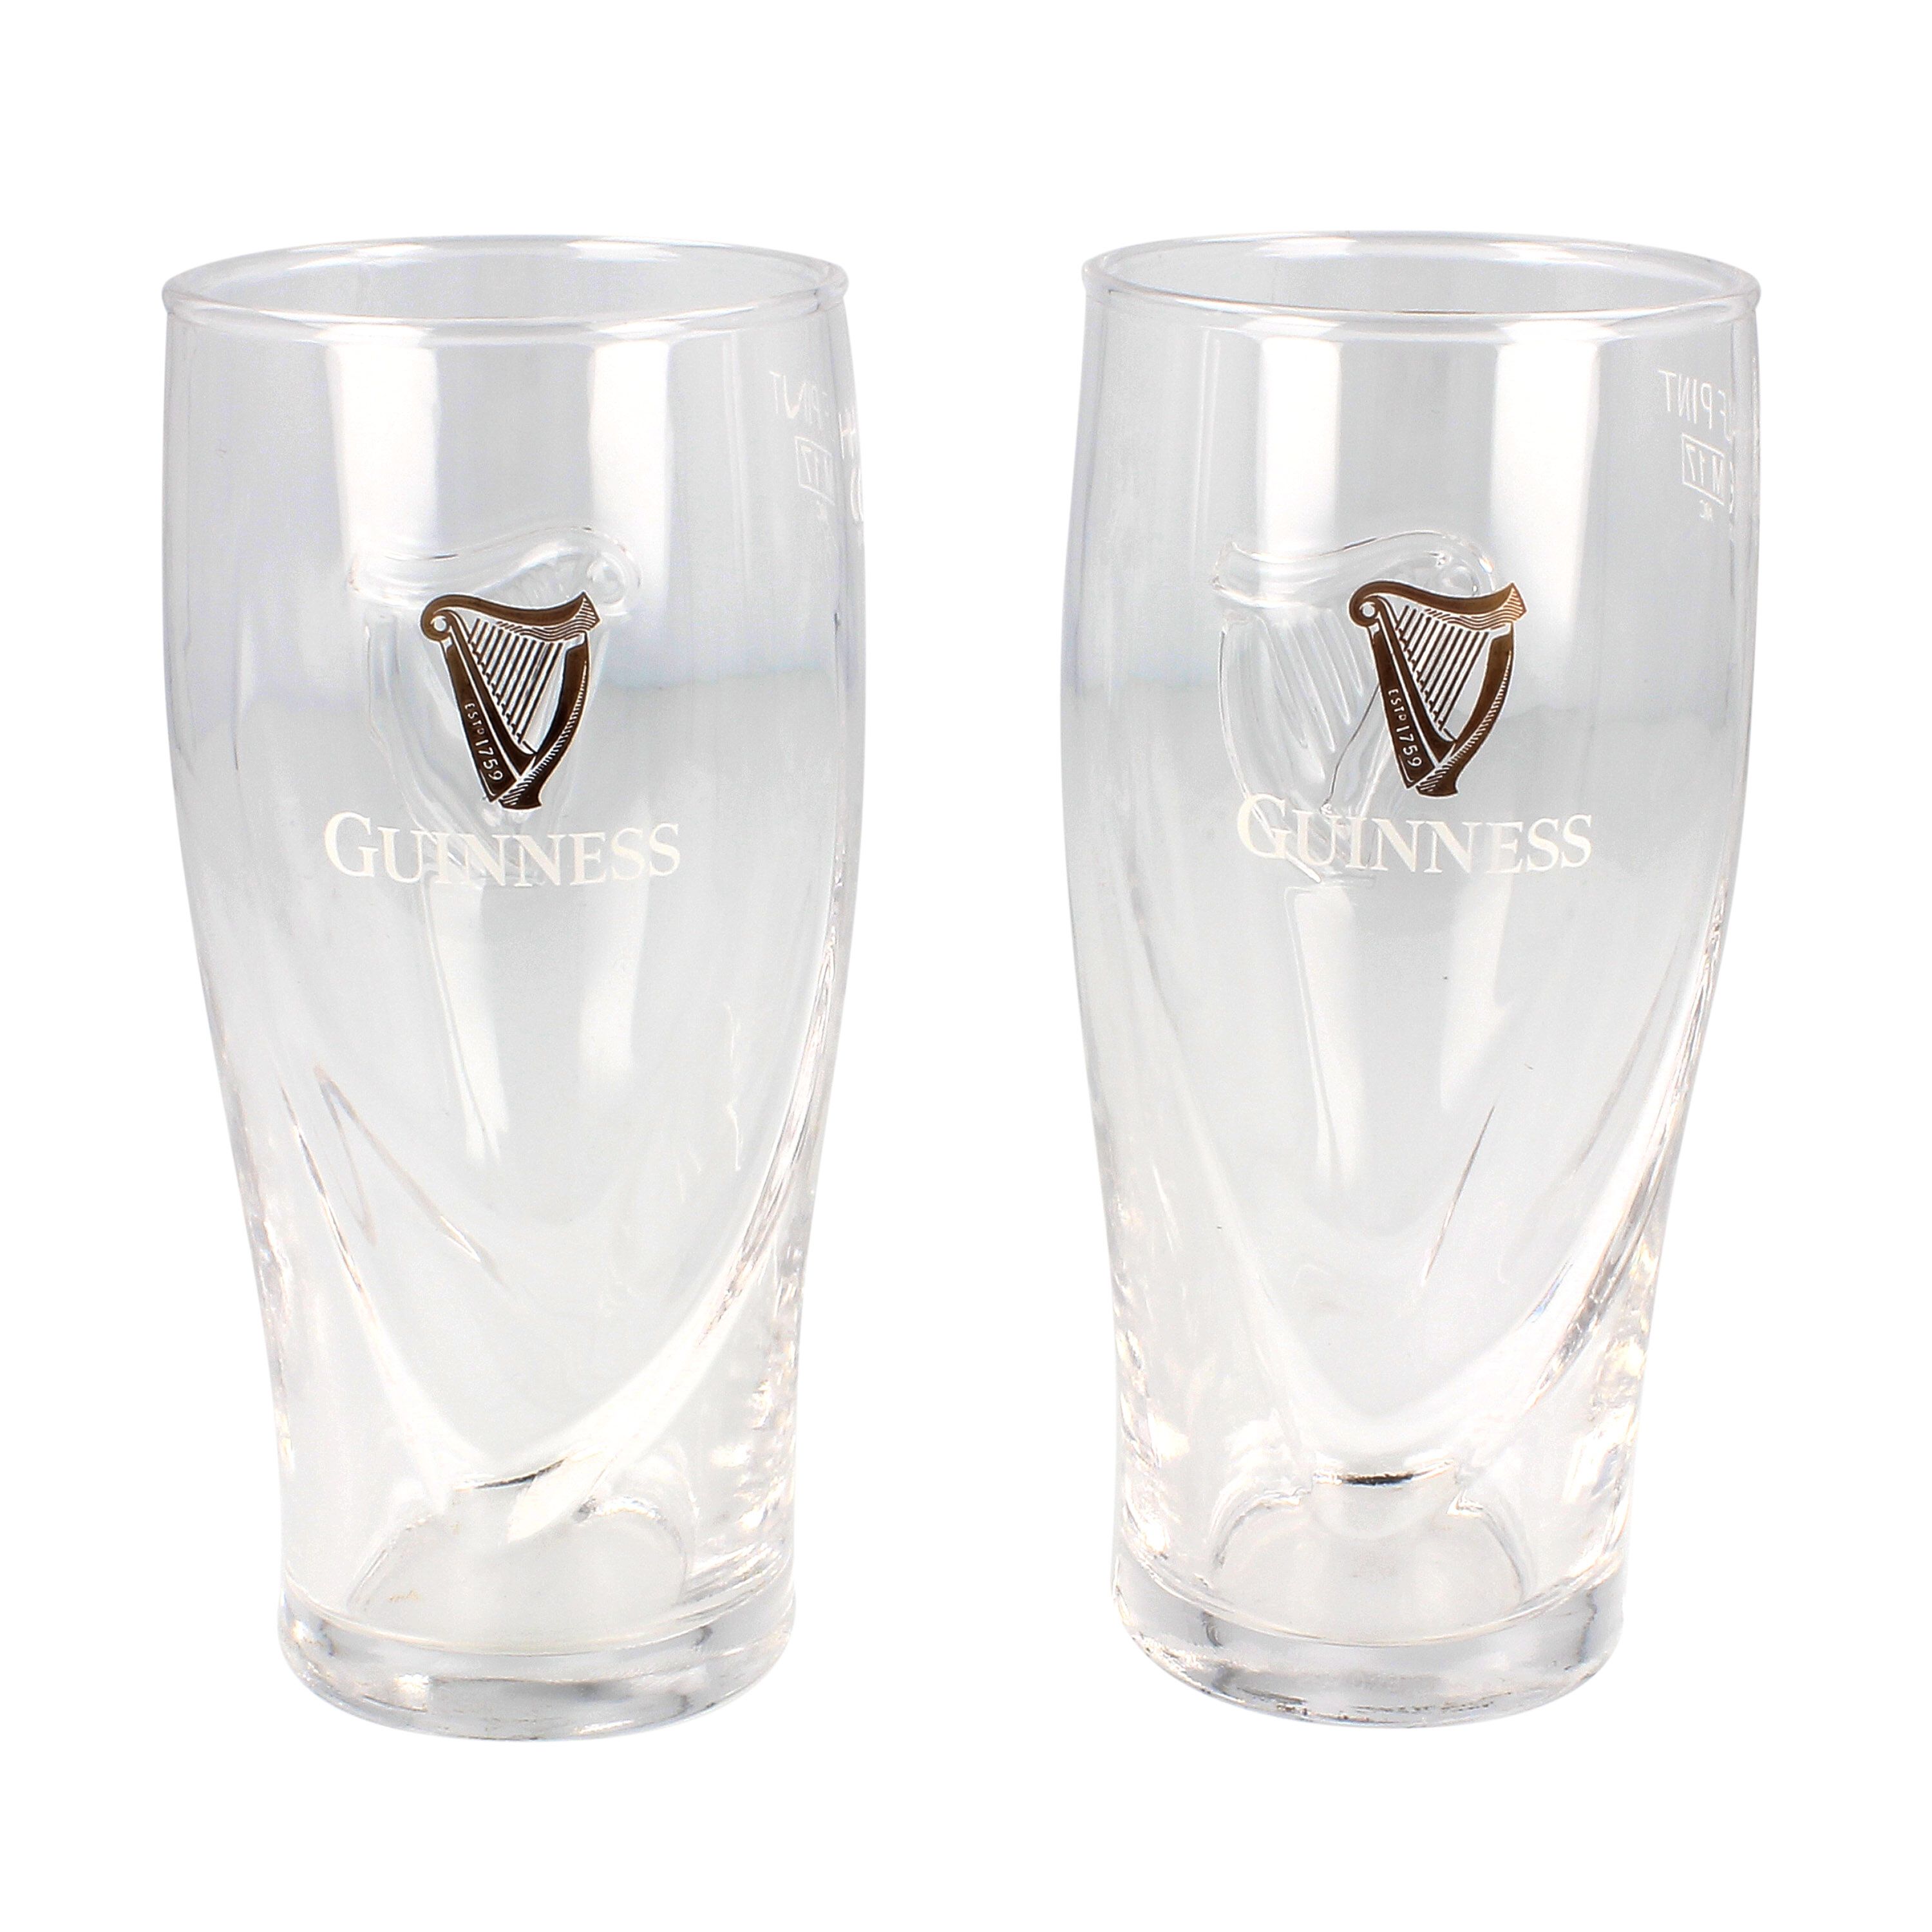 2 X Guinness Draught Pint Glasses 20oz  Embossed Harp Excellent Used Condition